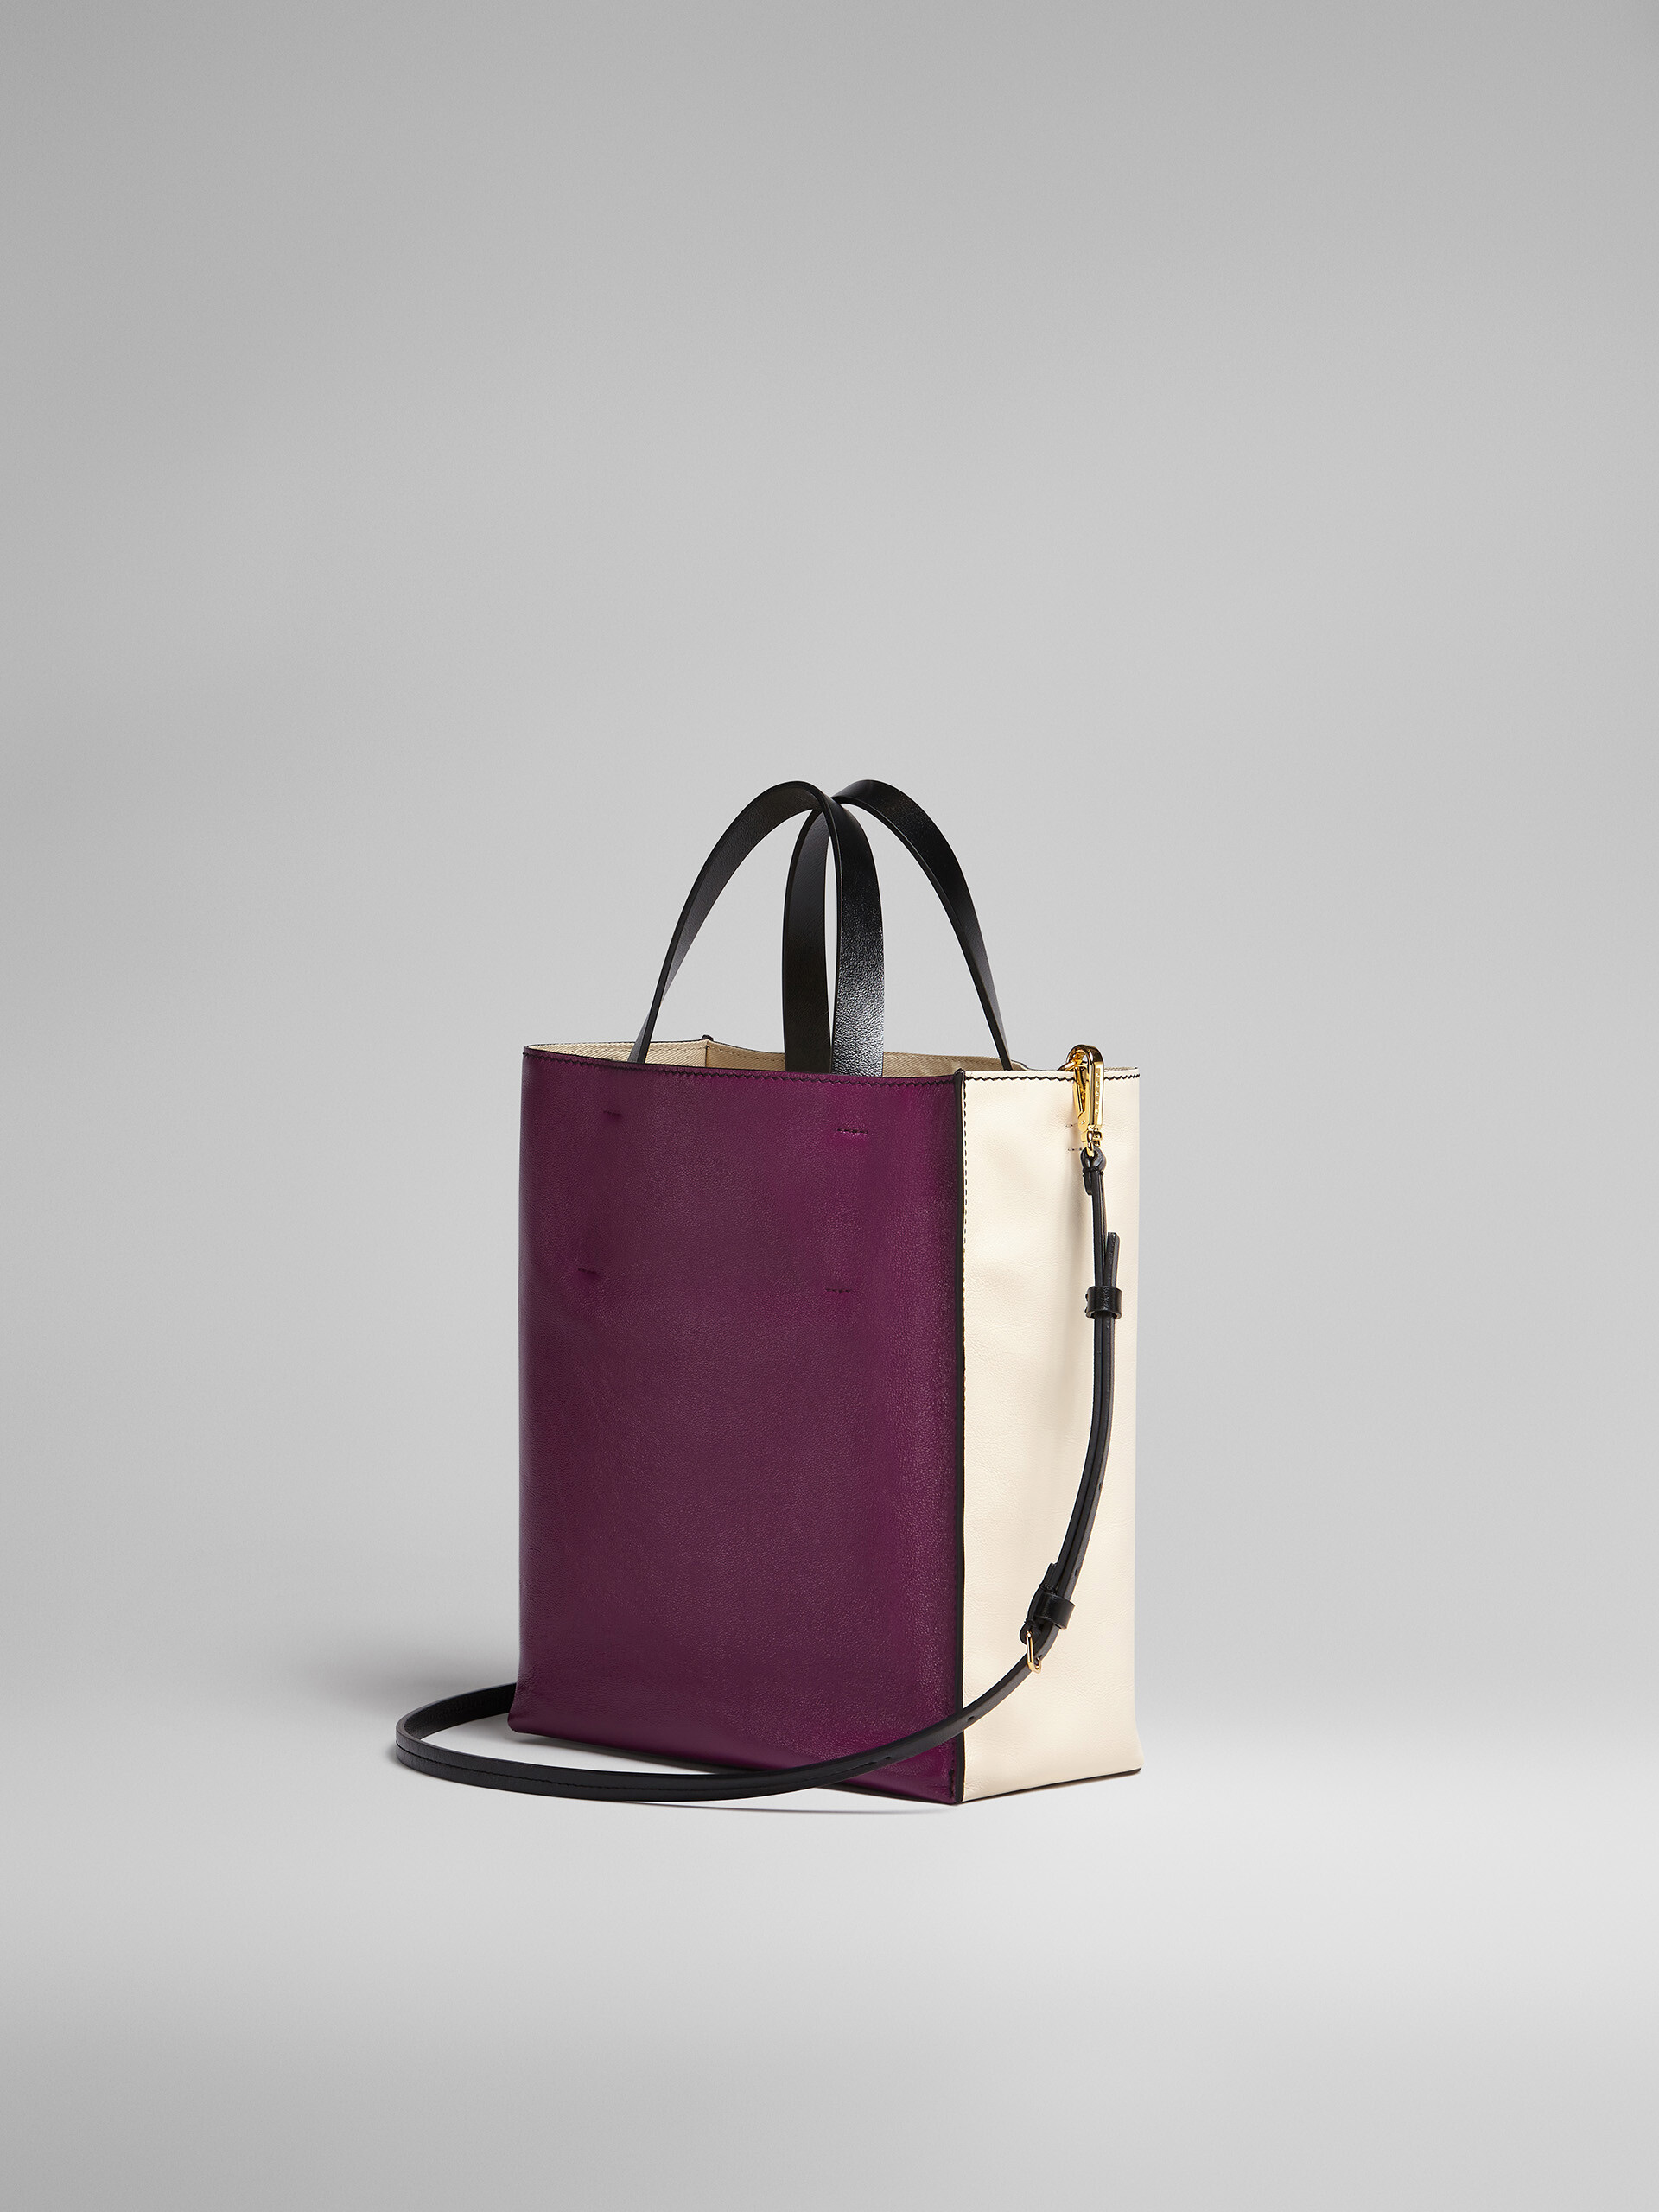 MUSEO SOFT small bag in white and purple leather - Shopping Bags - Image 3